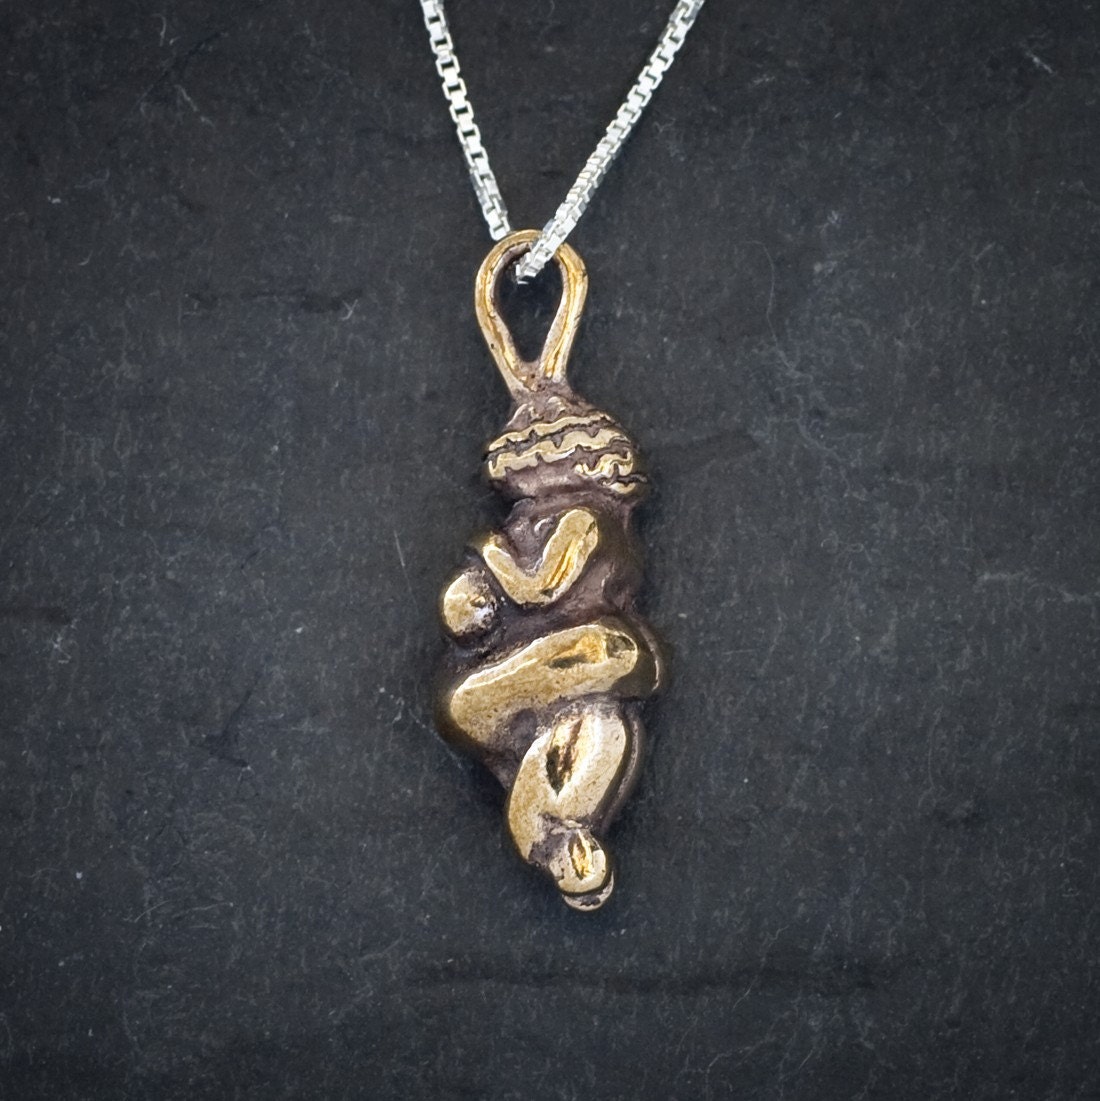 Bronze Venus of Willendorf Pendant - (Just the pendant, chains are sold separately.)